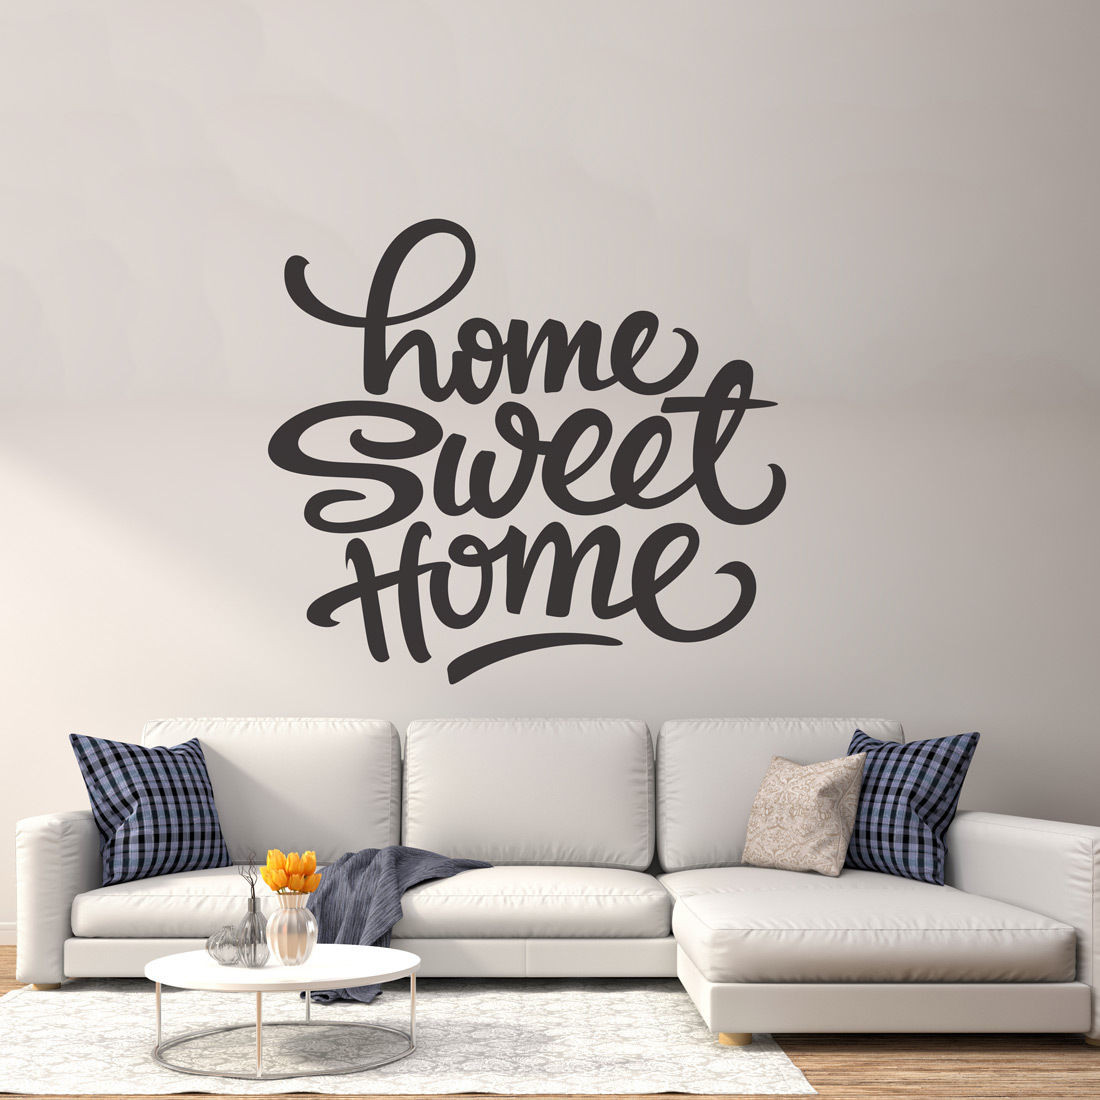 Wall Stickers for Living Room New Sweet Home Wall Decor Vinyl Sticker Decal Livingroom